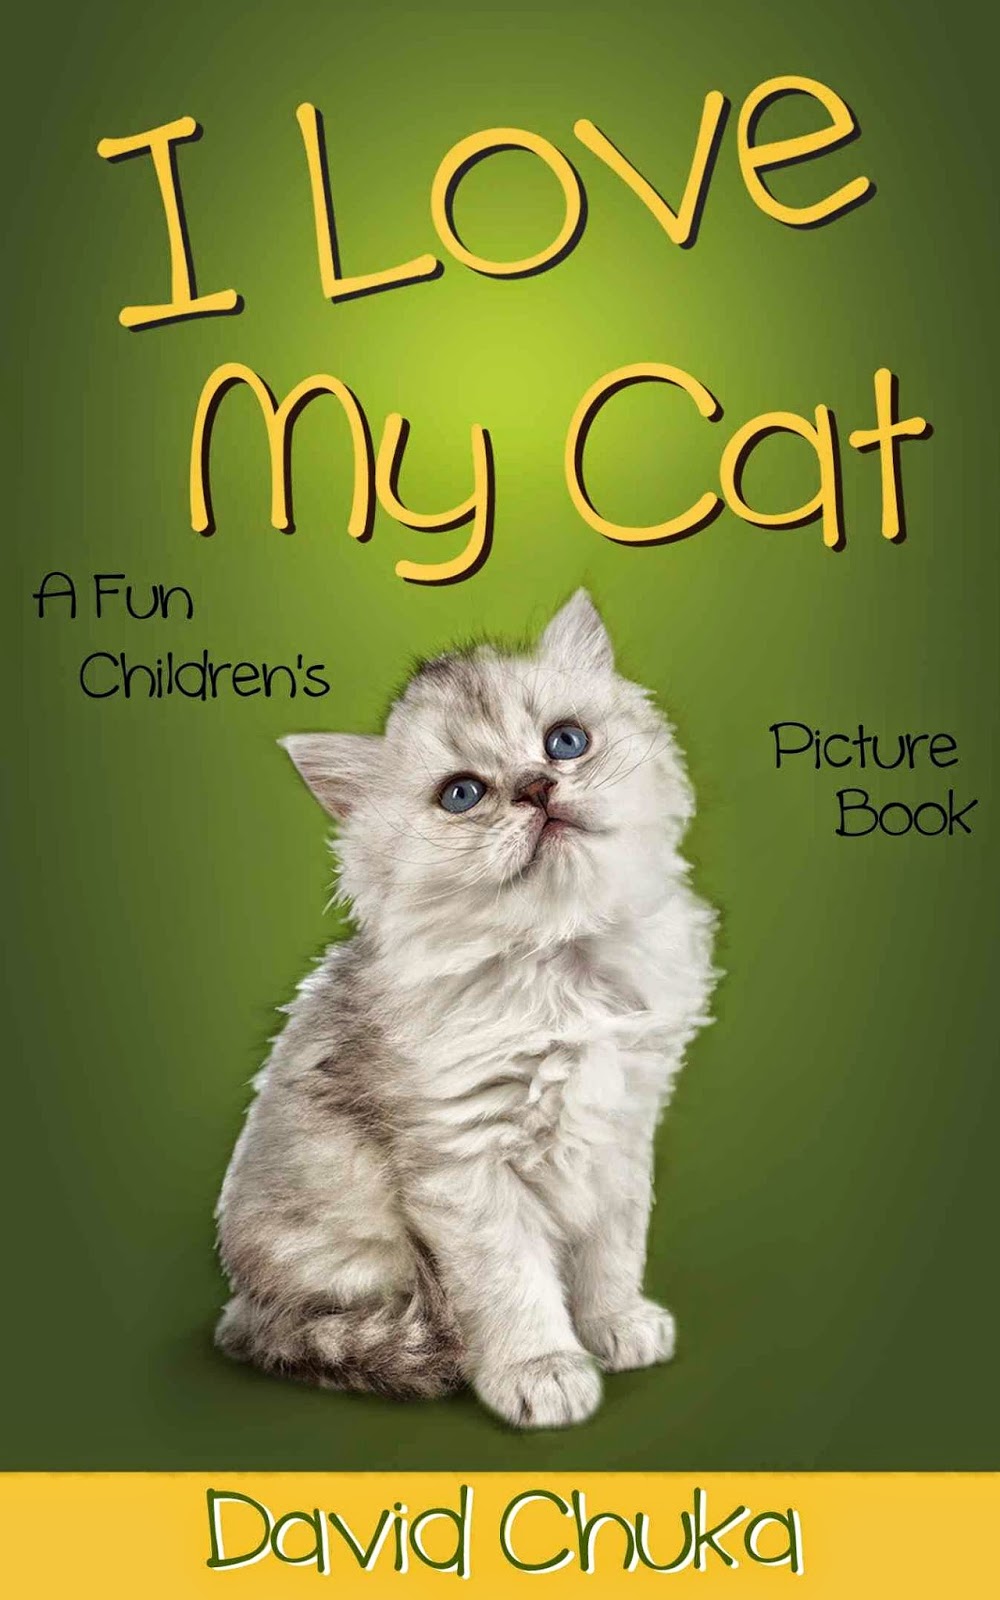 Cat book. Cat book for Kids. Book about Cats. Books for Kids about Cat. My cat now